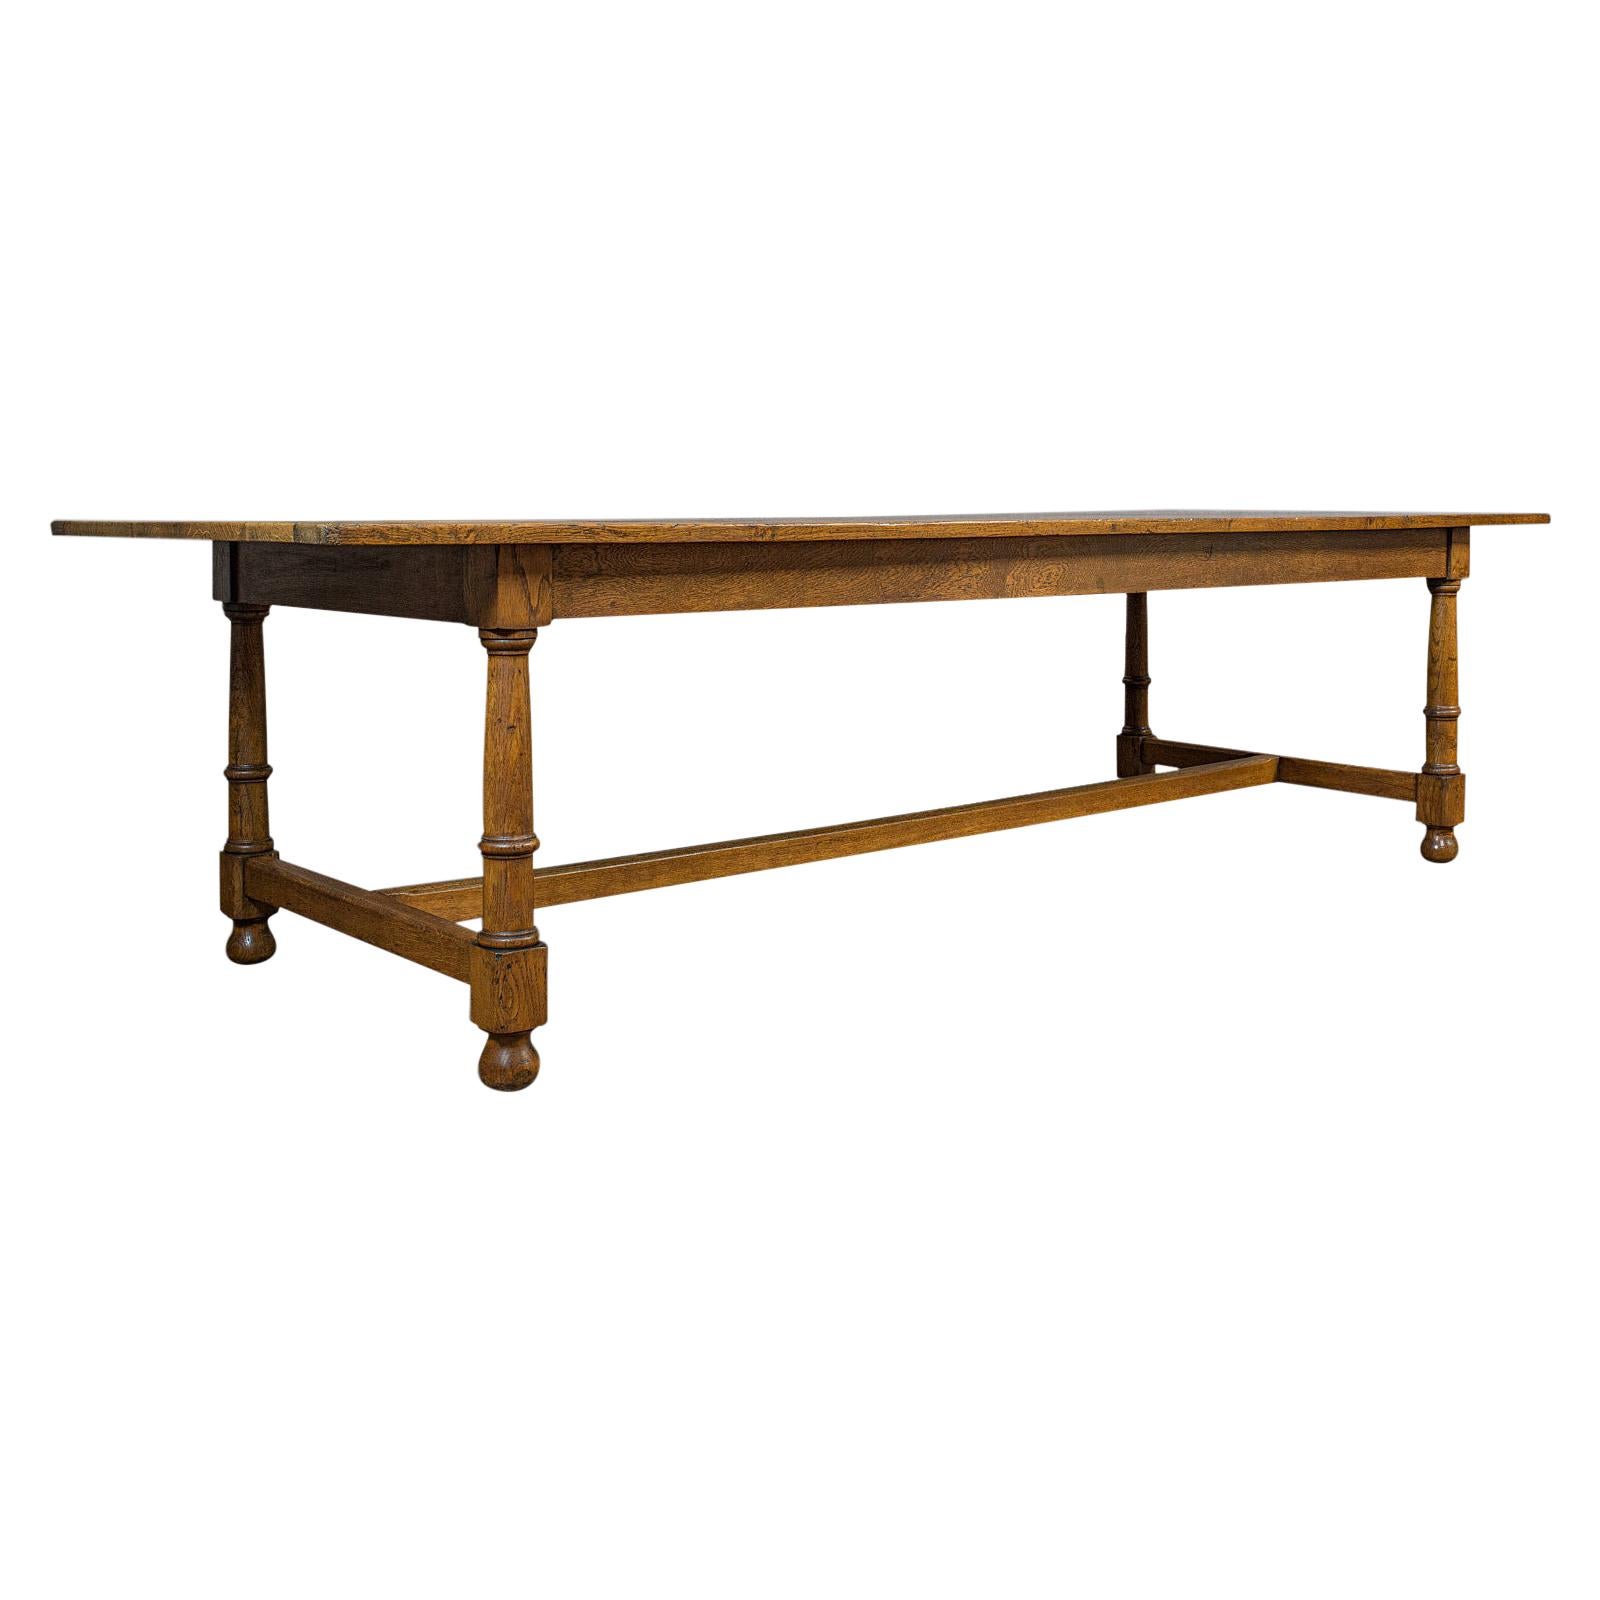 Large, Antique Refectory Table, Scottish, 8 Seat, Oak, Dining, Victorian